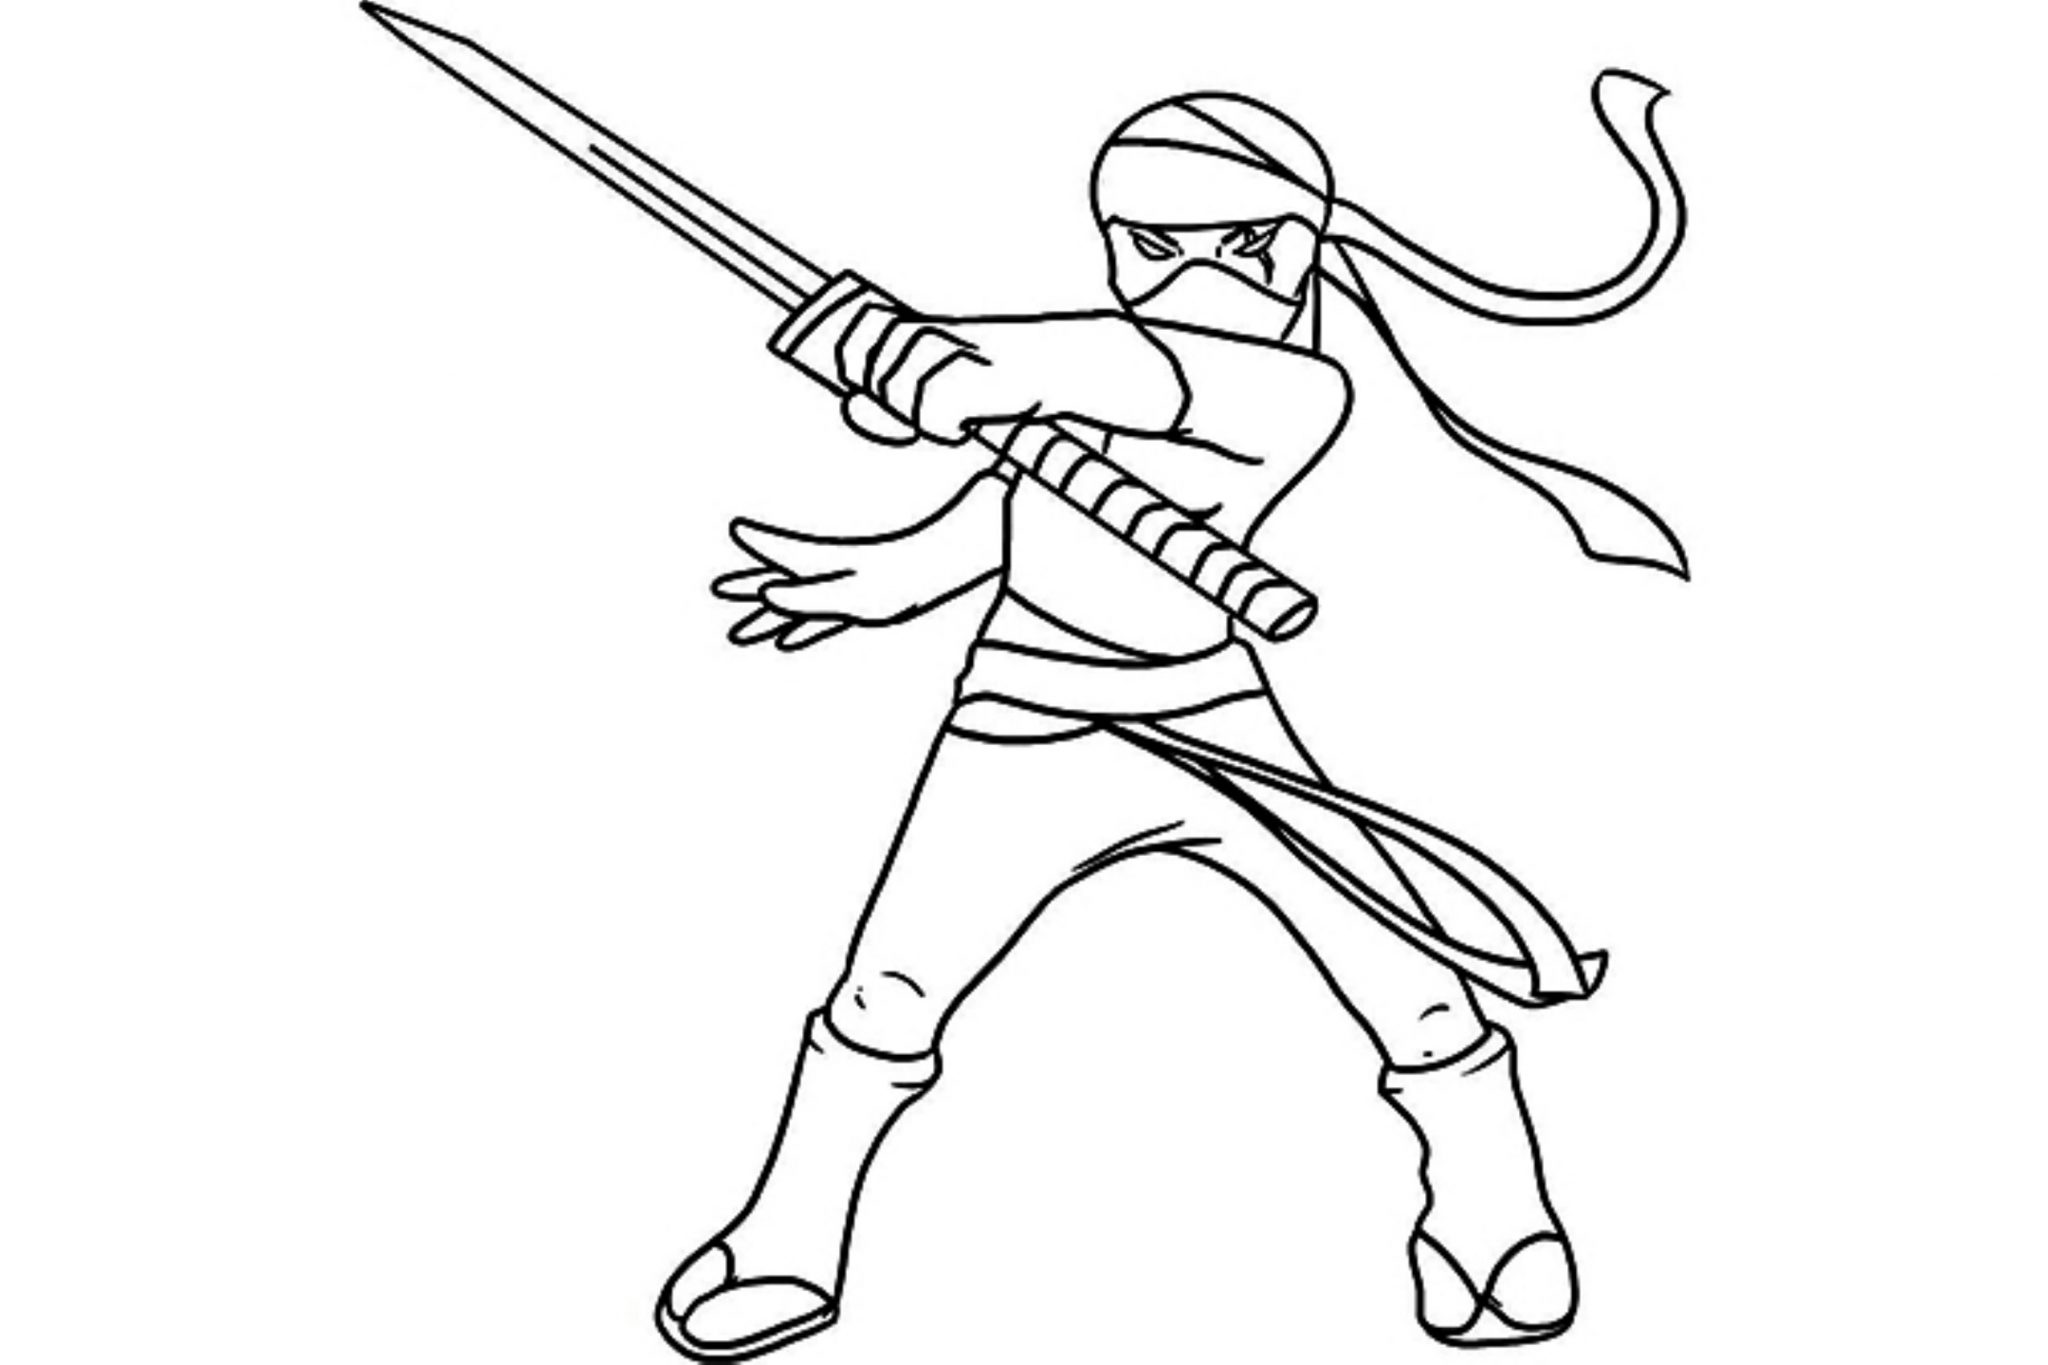 Print & Download - The Attractive Ninja Coloring Pages for Kids Activity